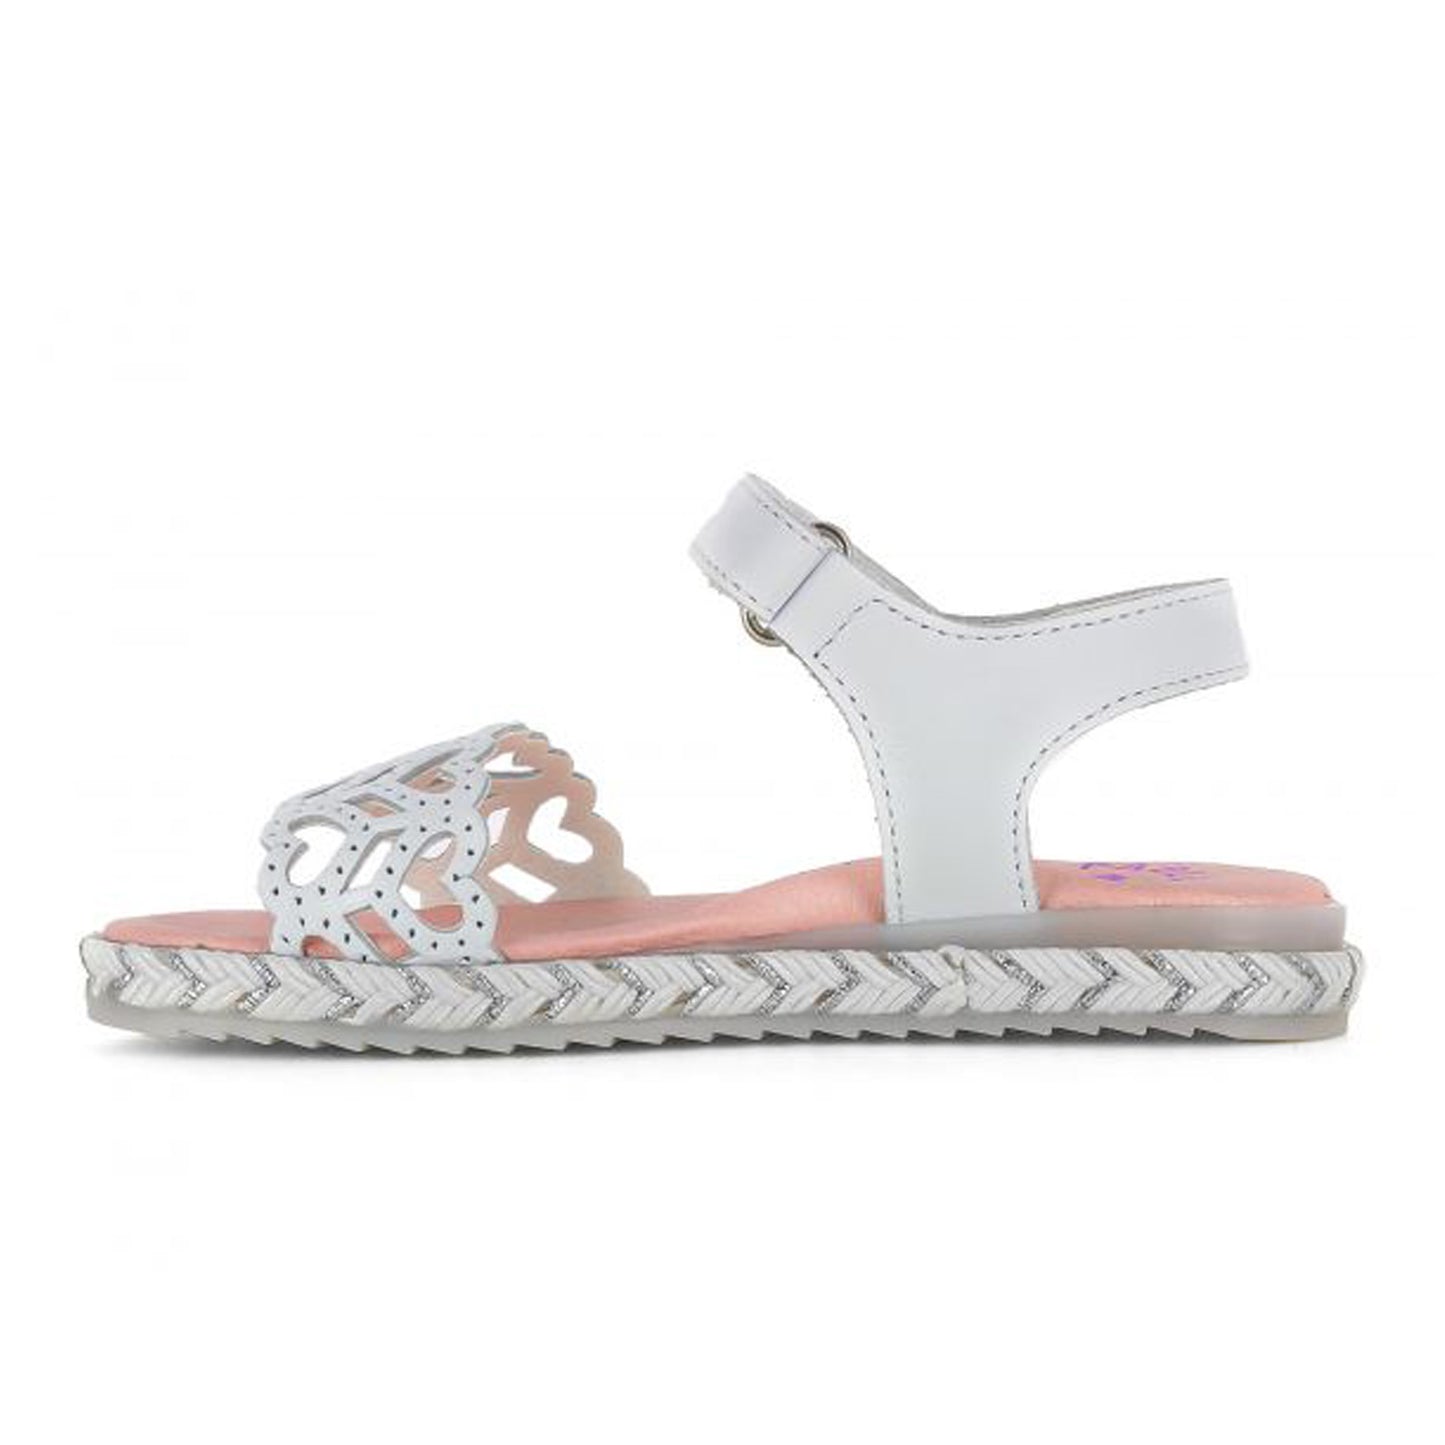 Pablosky Olympo Sandals